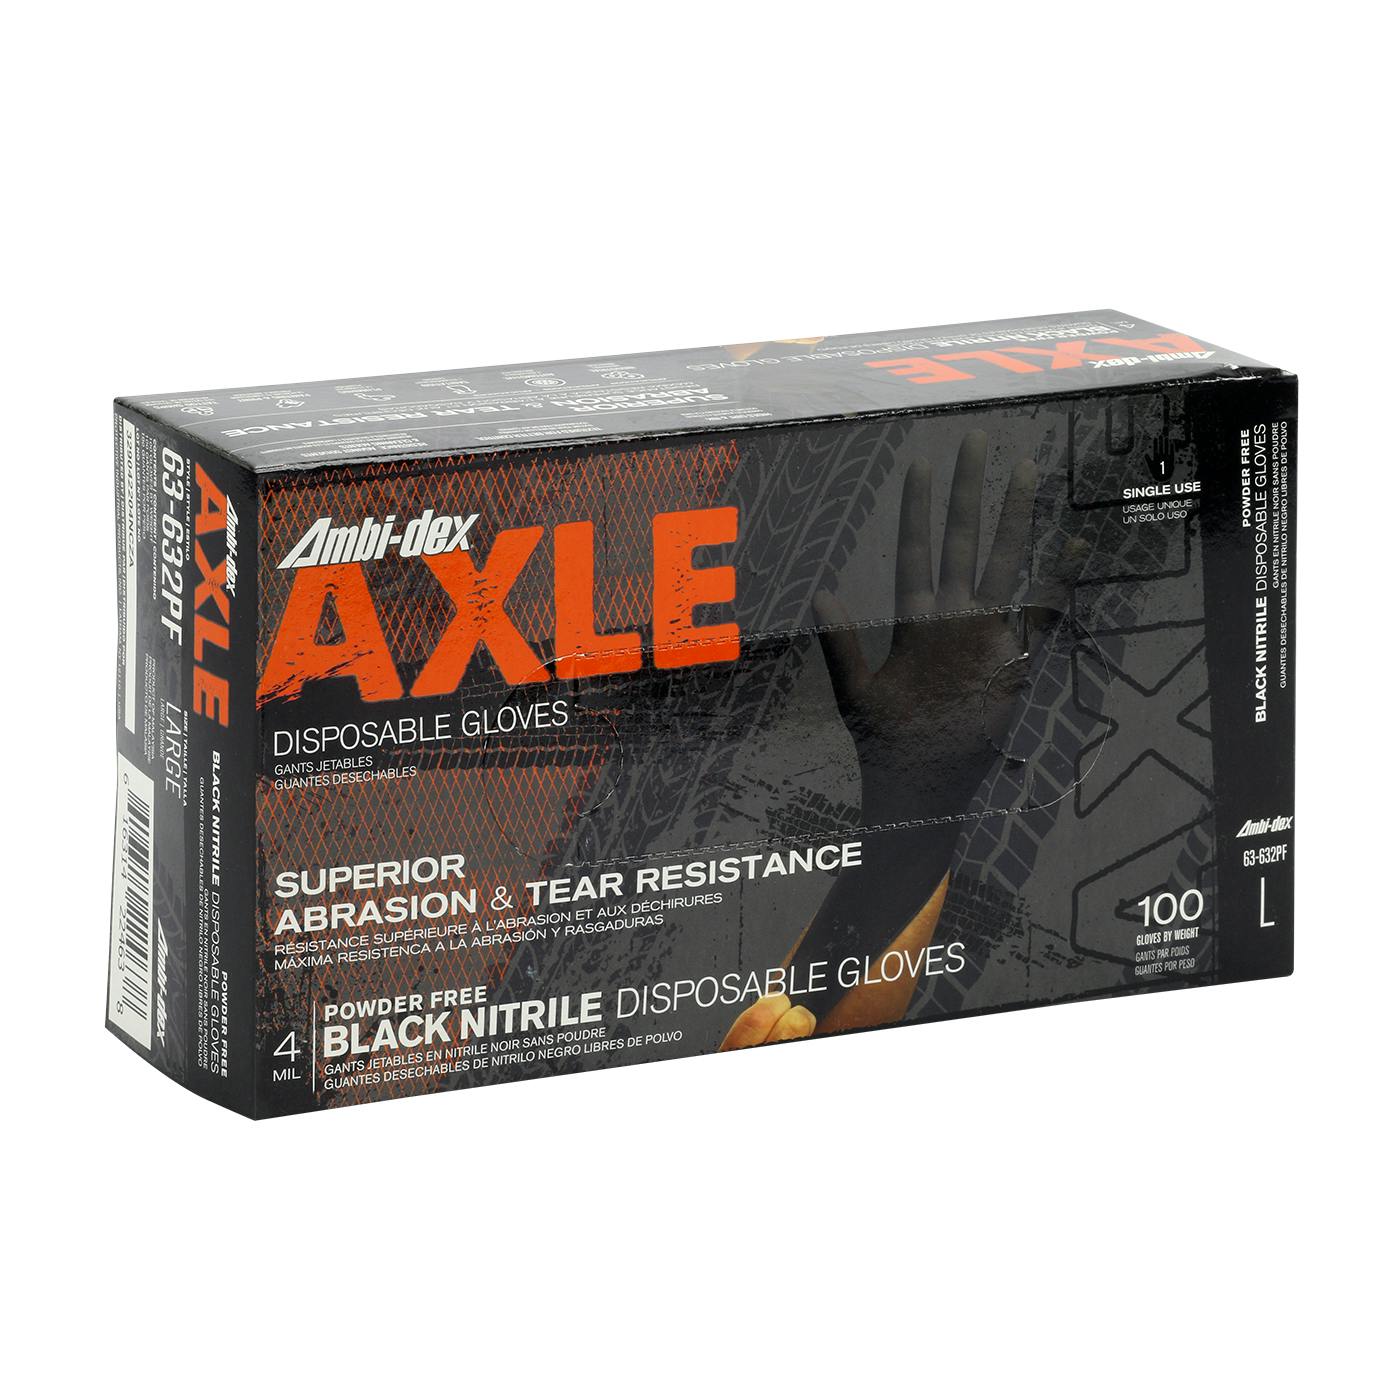 Ambi-dex® Axle Disposable Nitrile Glove, Powder Free with Textured Grip - 4 mil (63-632PF)_0